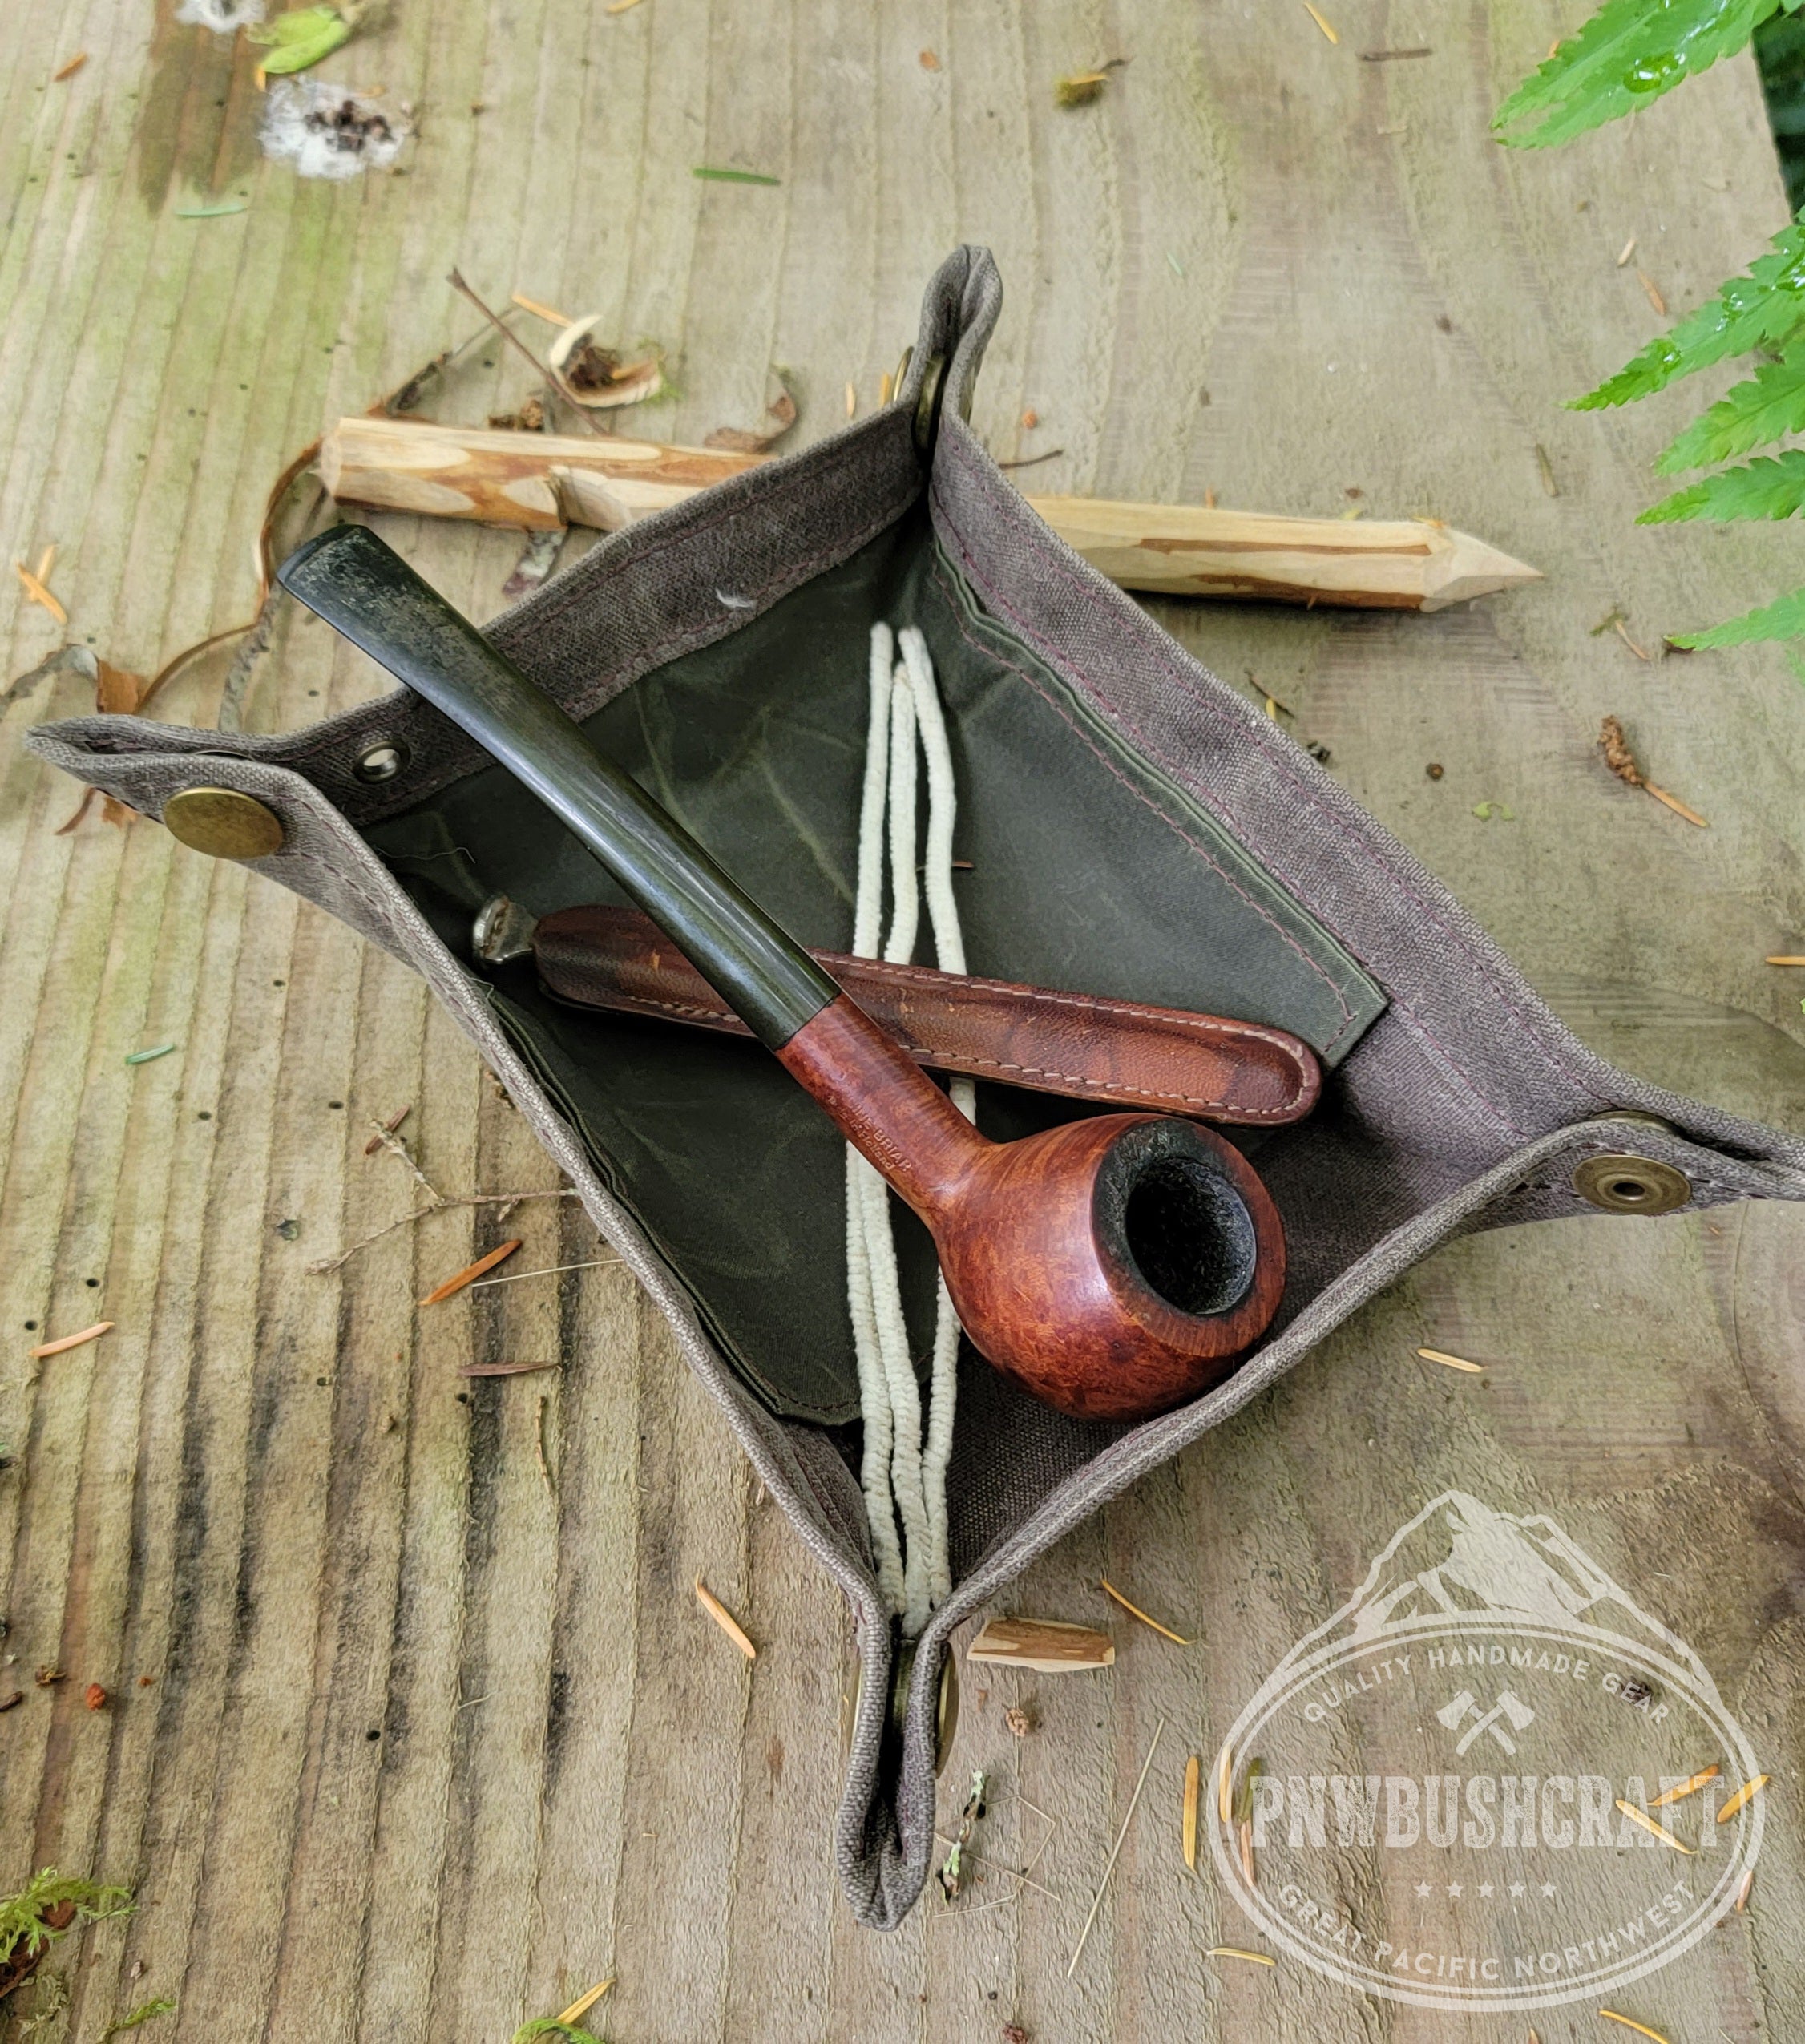 EDC Pipe and Accessories  Waxed Canvas Travel Tray for your Gear - Made to Order